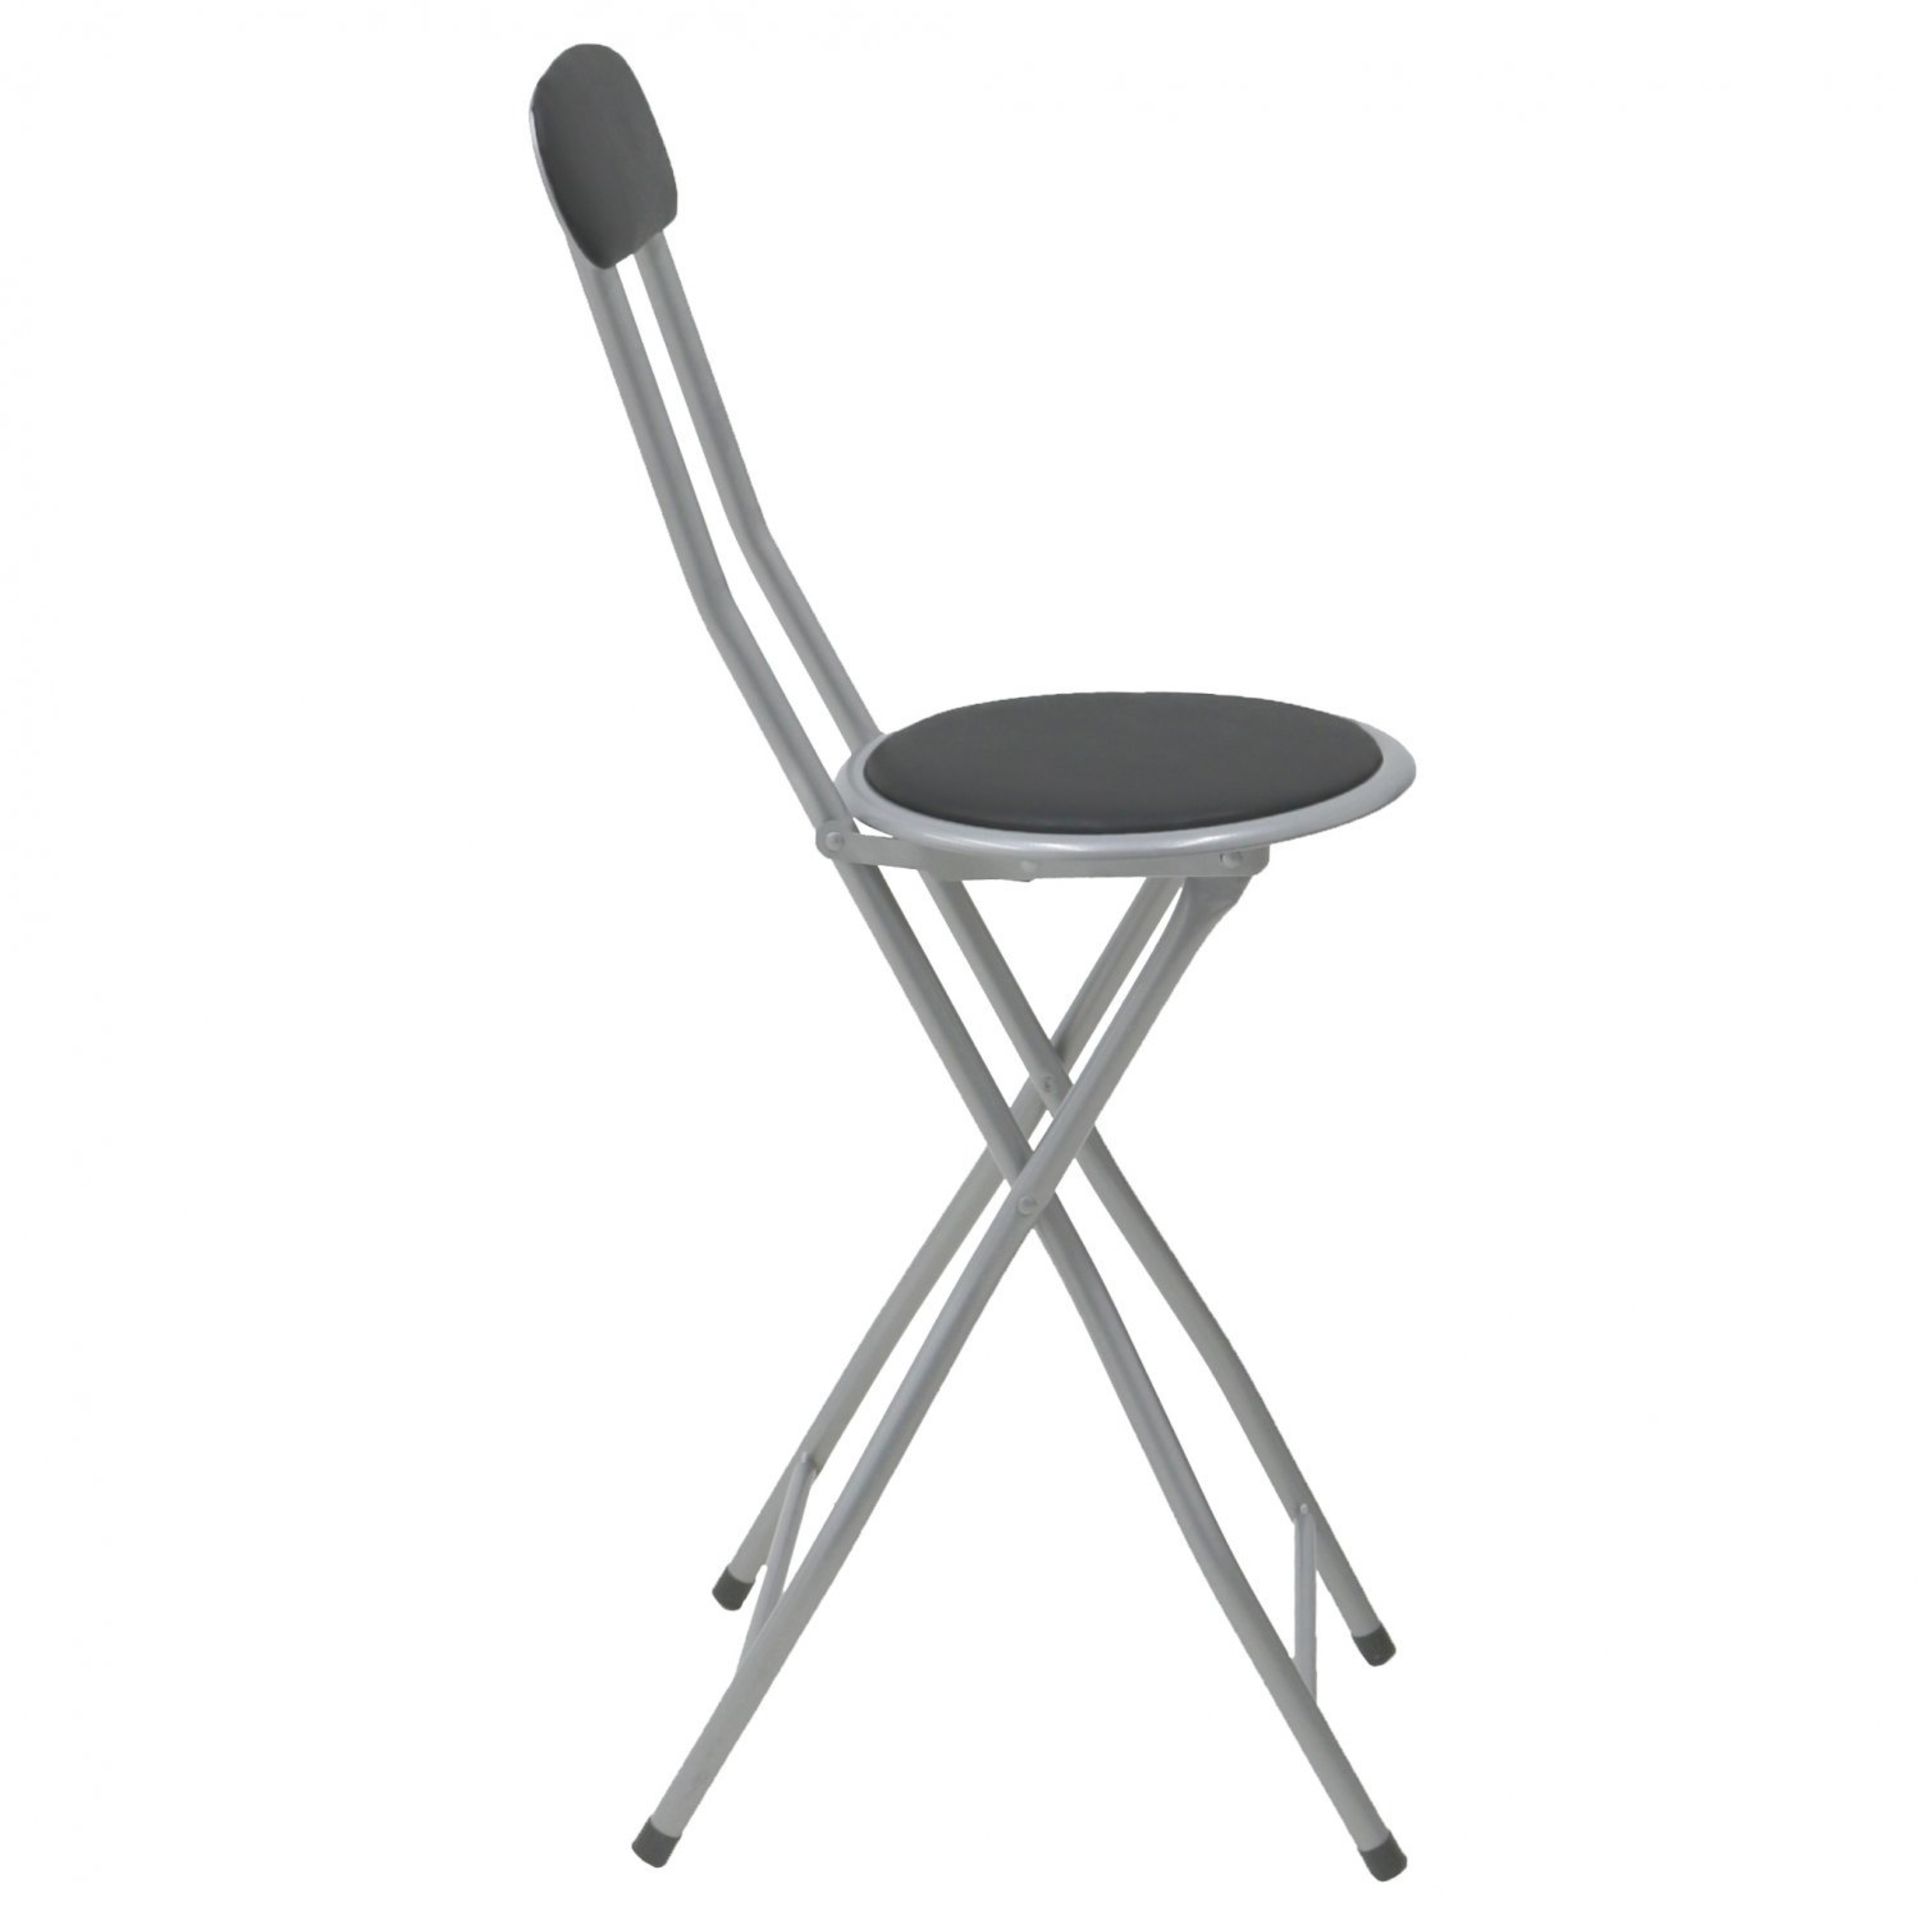 (LF10) Black Padded Folding High Chair Breakfast Kitchen Bar Stool Seat Perfect for sitting ... - Image 2 of 2